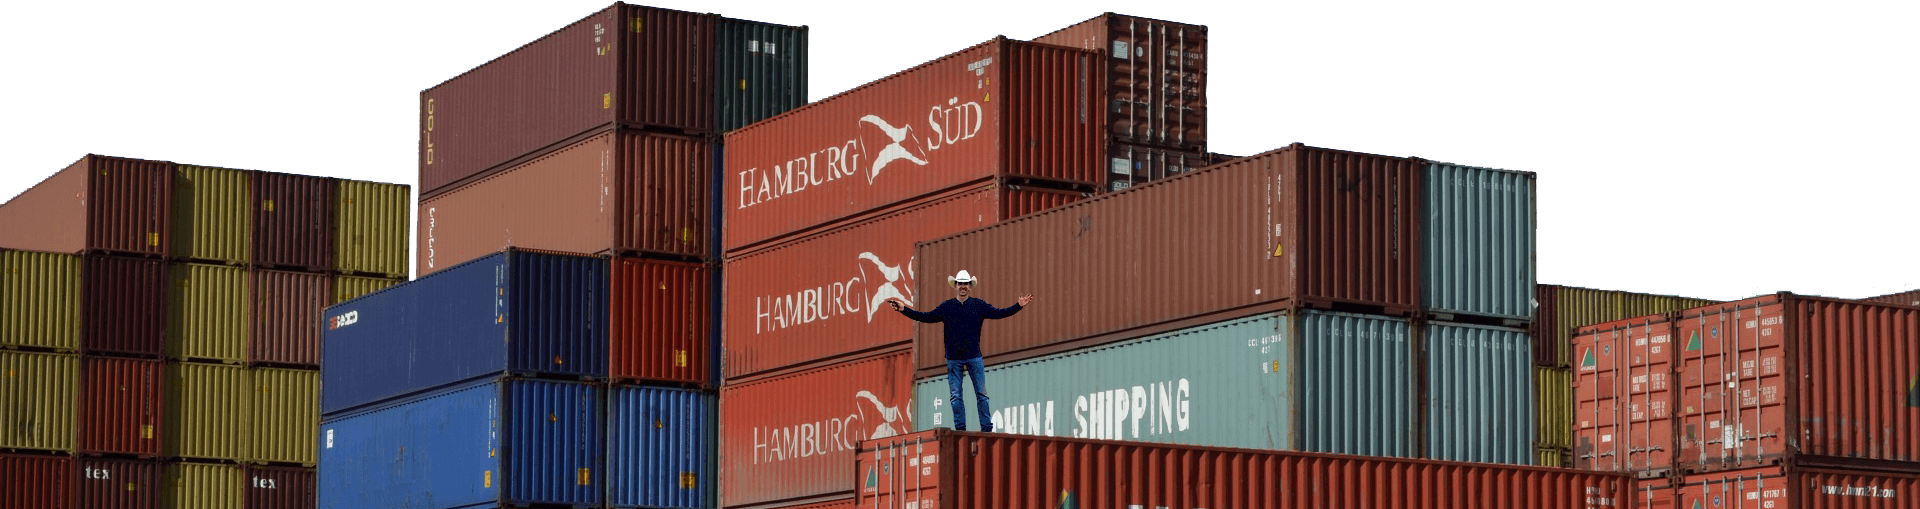 Danny Used Shipping Container Depot Nashville Sale